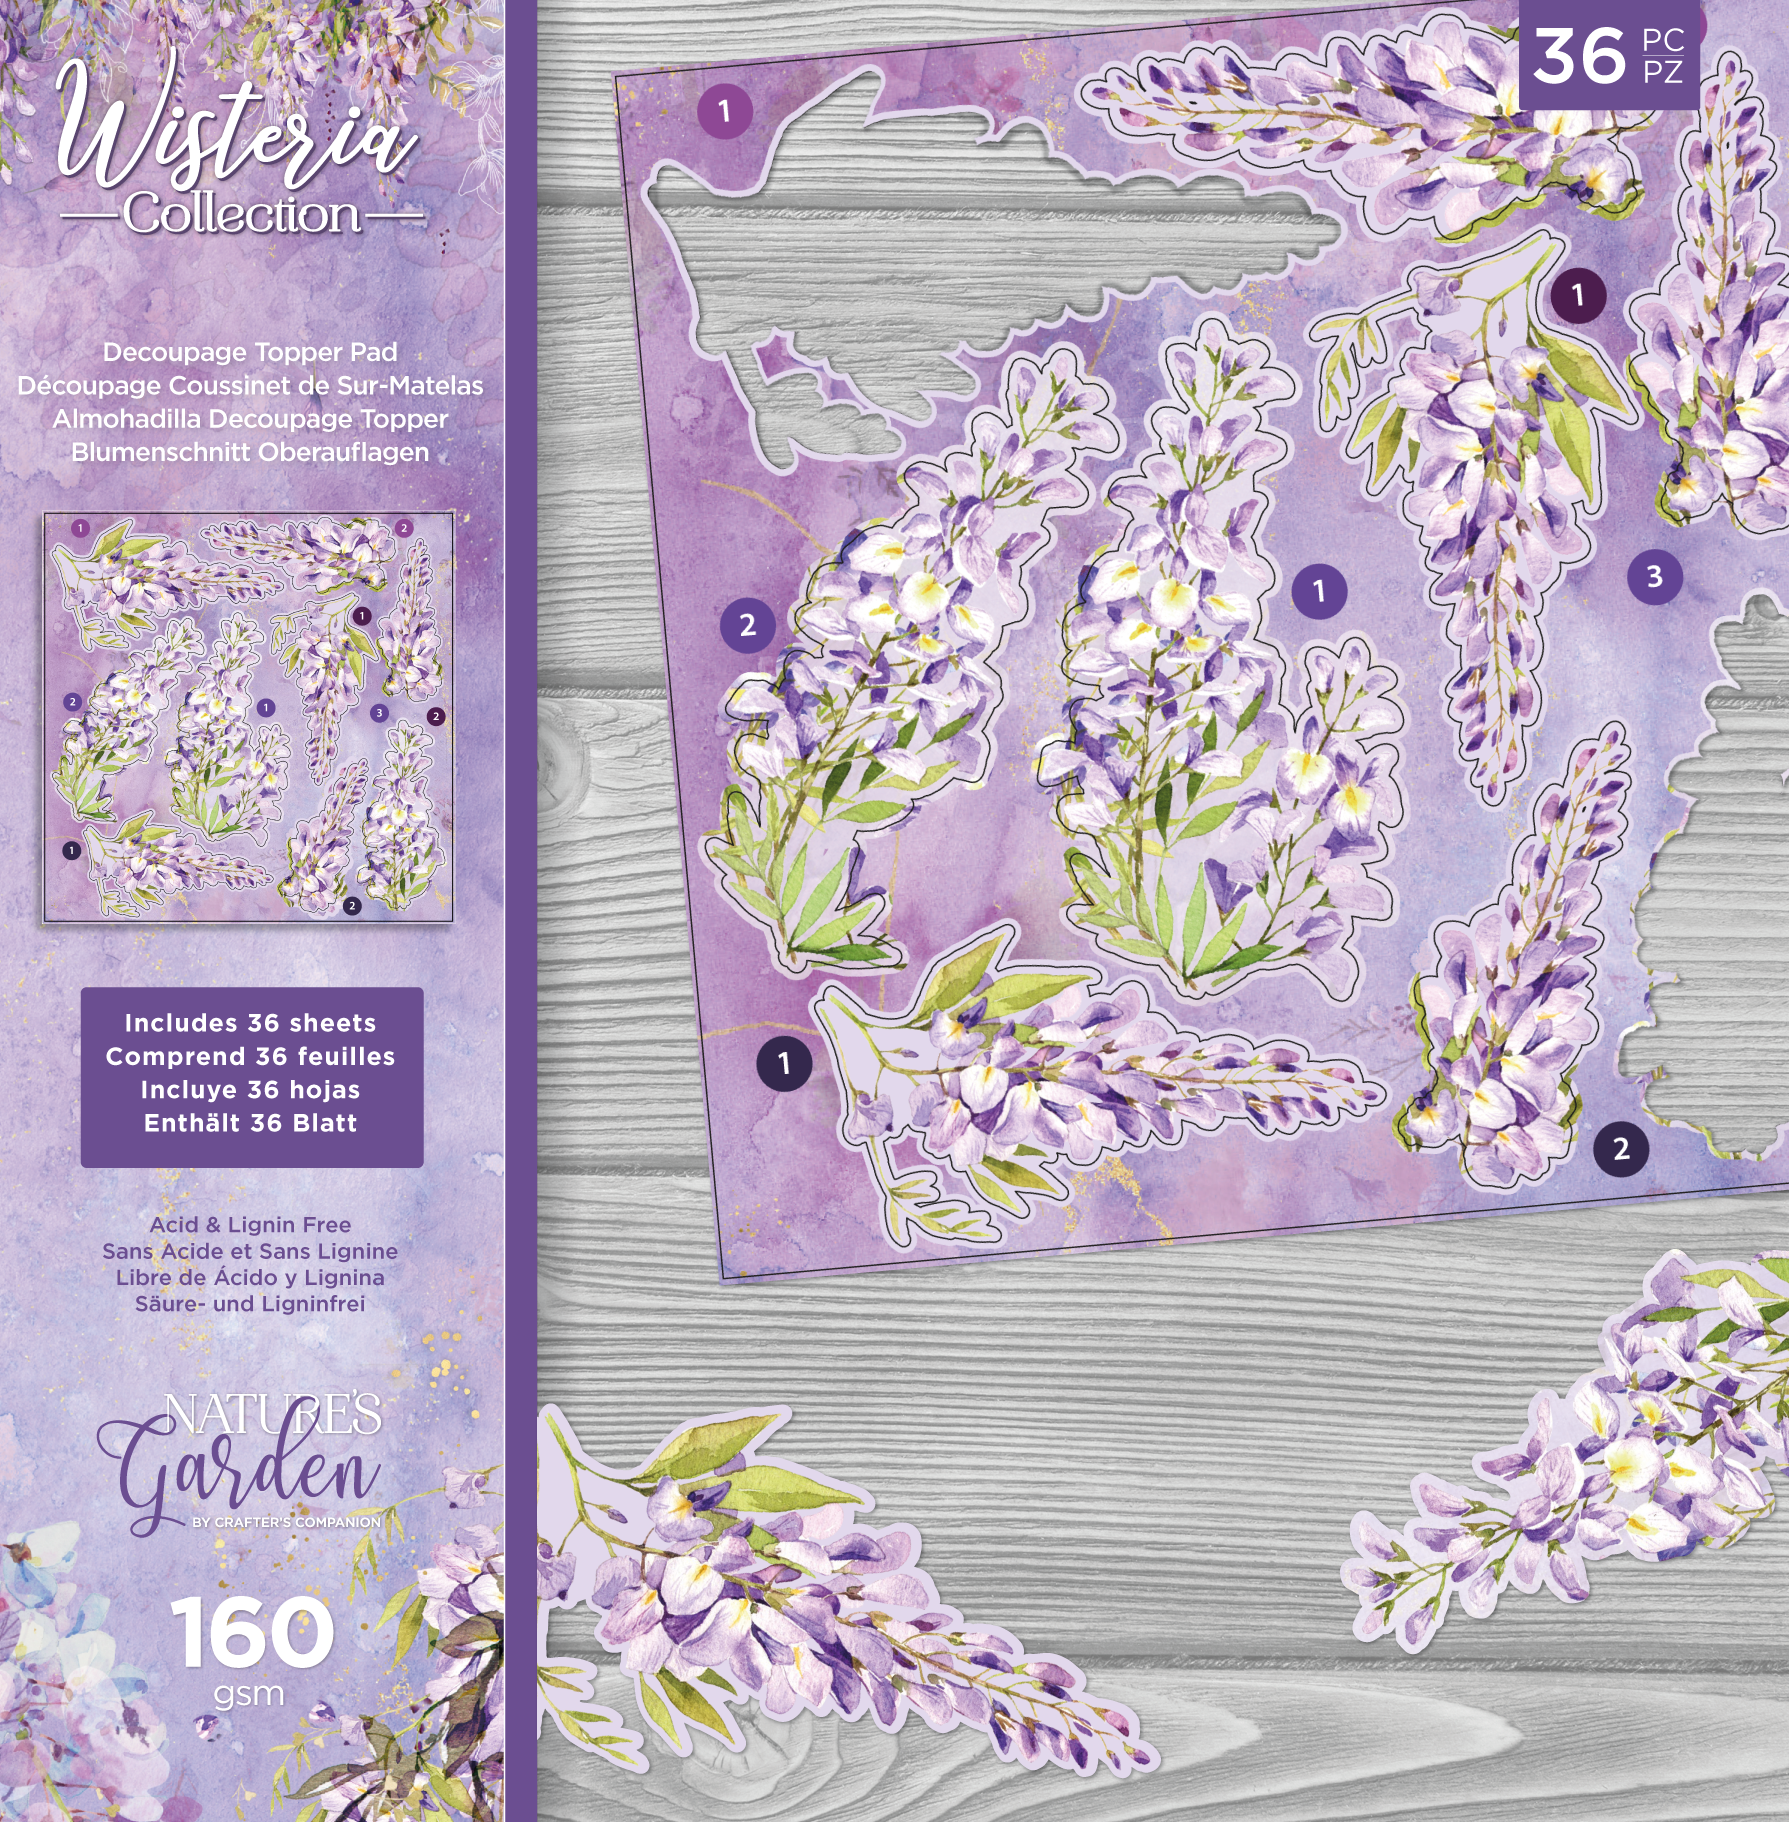 Wisteria Collection 6x6 Inch Decoupage Topper Pad (NG-WC-DTPAD6) -  Craftlines B.V.